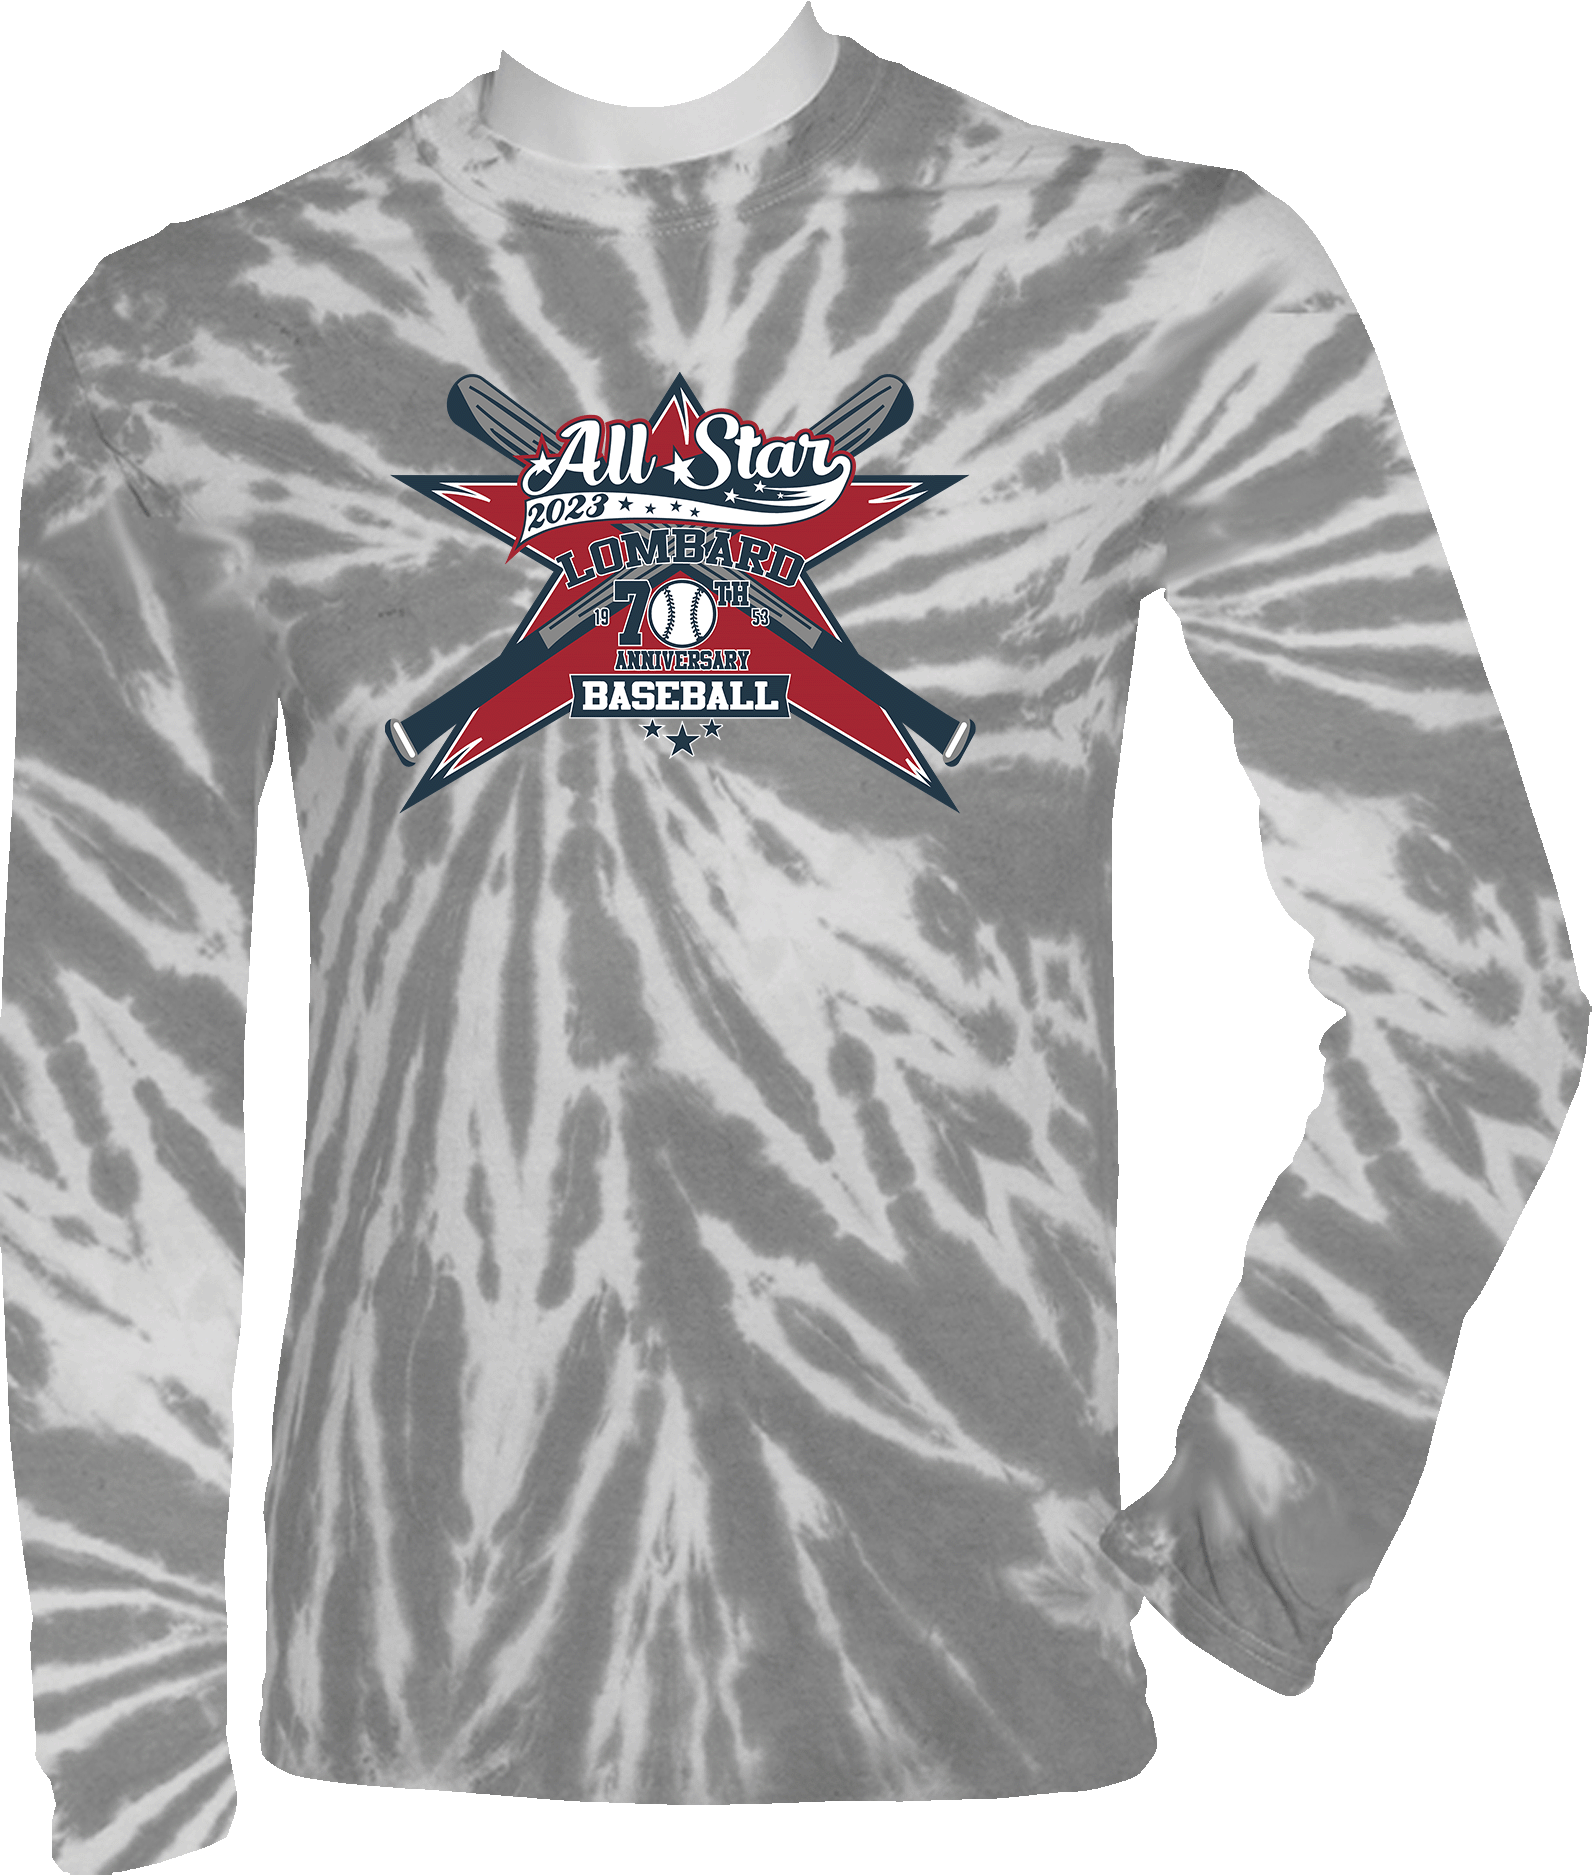 TIE-DYE LONG SLEEVES - 2023 Lombard Baseball League's 70th Anniversary All Star Event